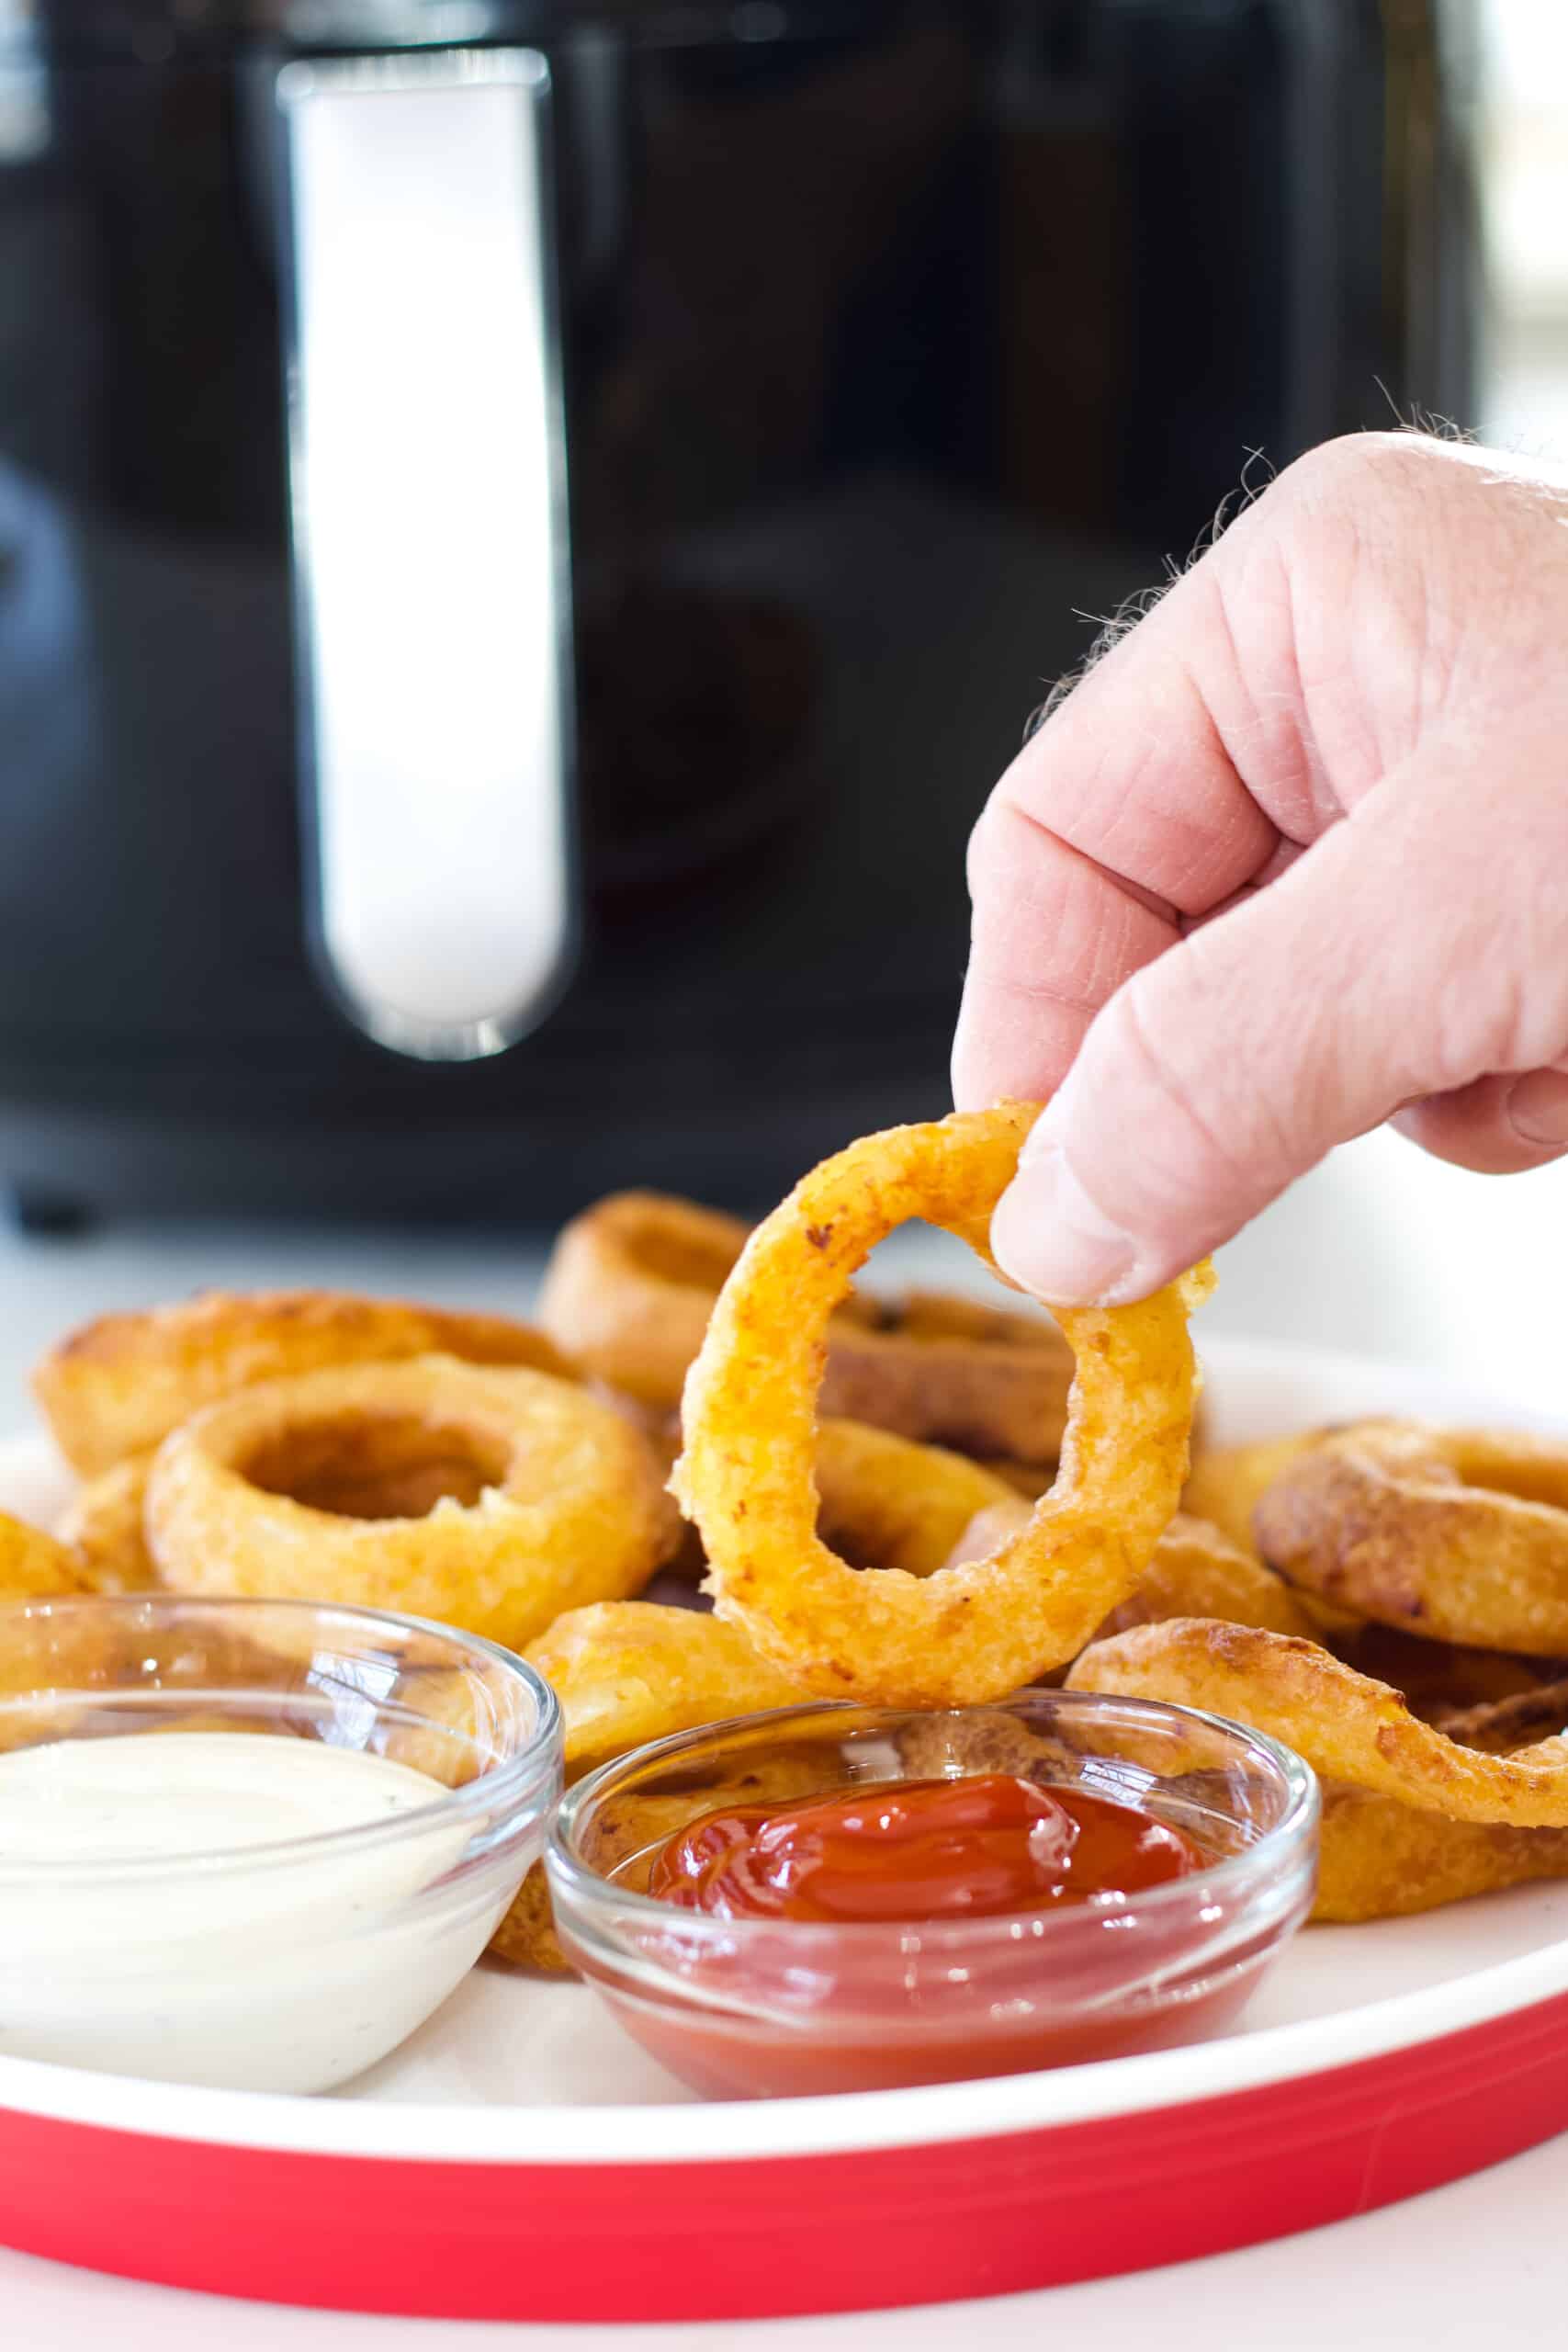 A hand holding an onion ring to dip into a bowl of ketchup.